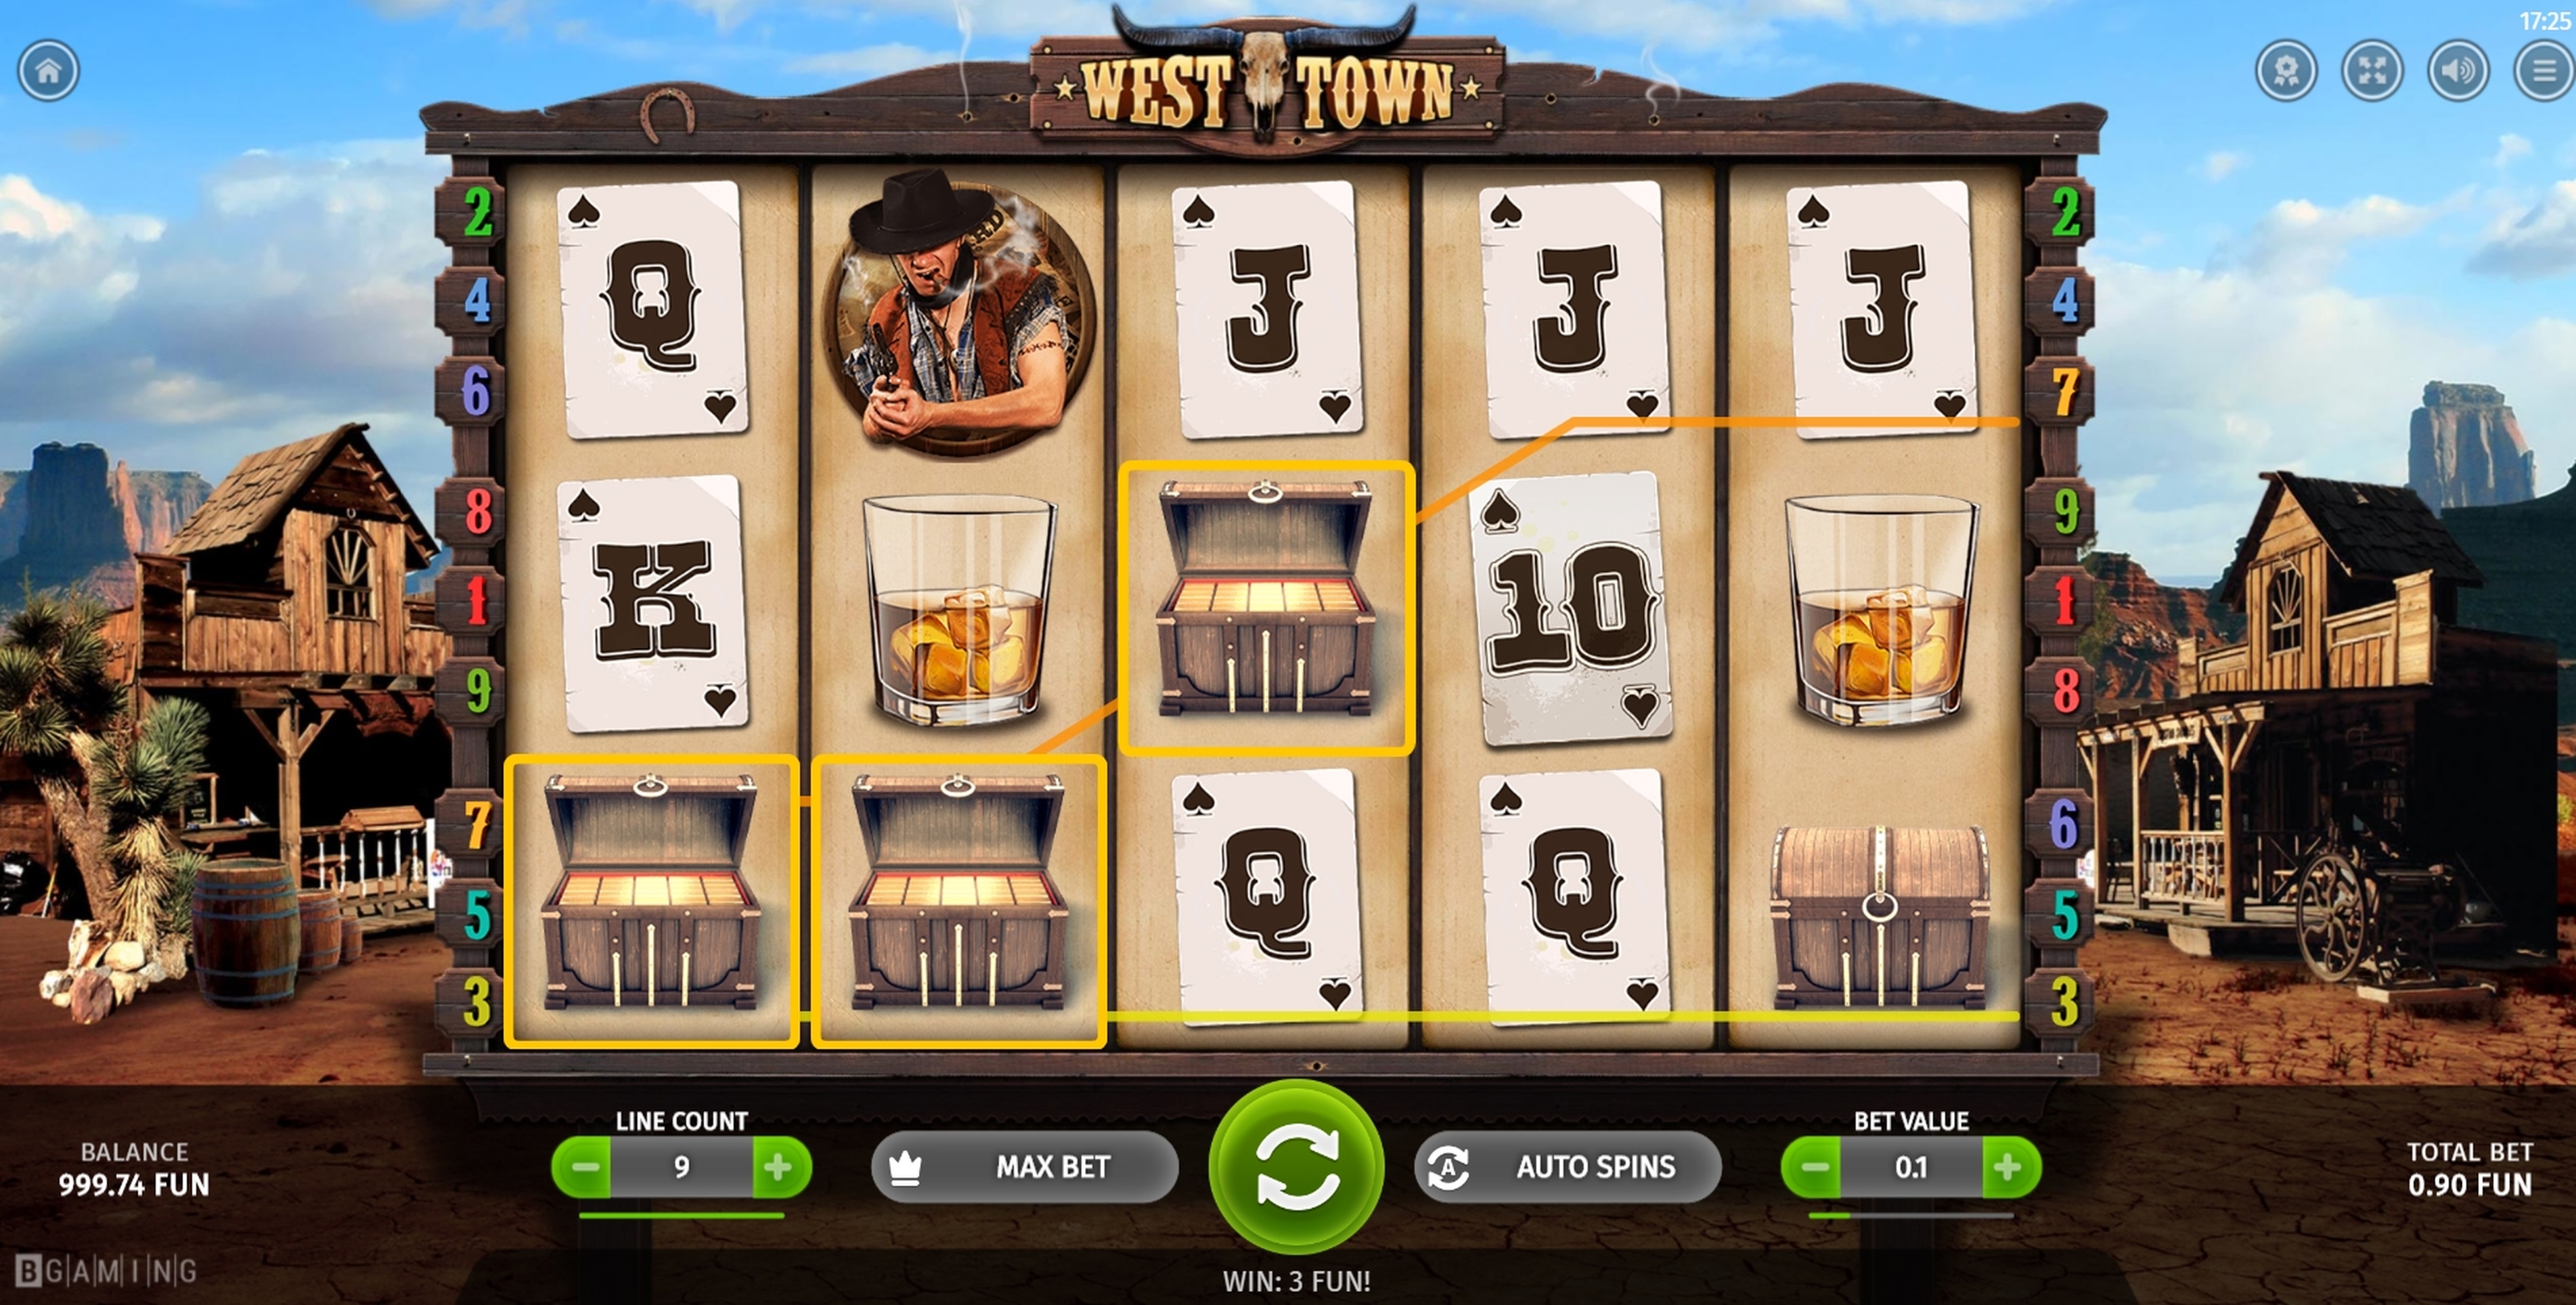 Win Money in West Town Free Slot Game by BGAMING